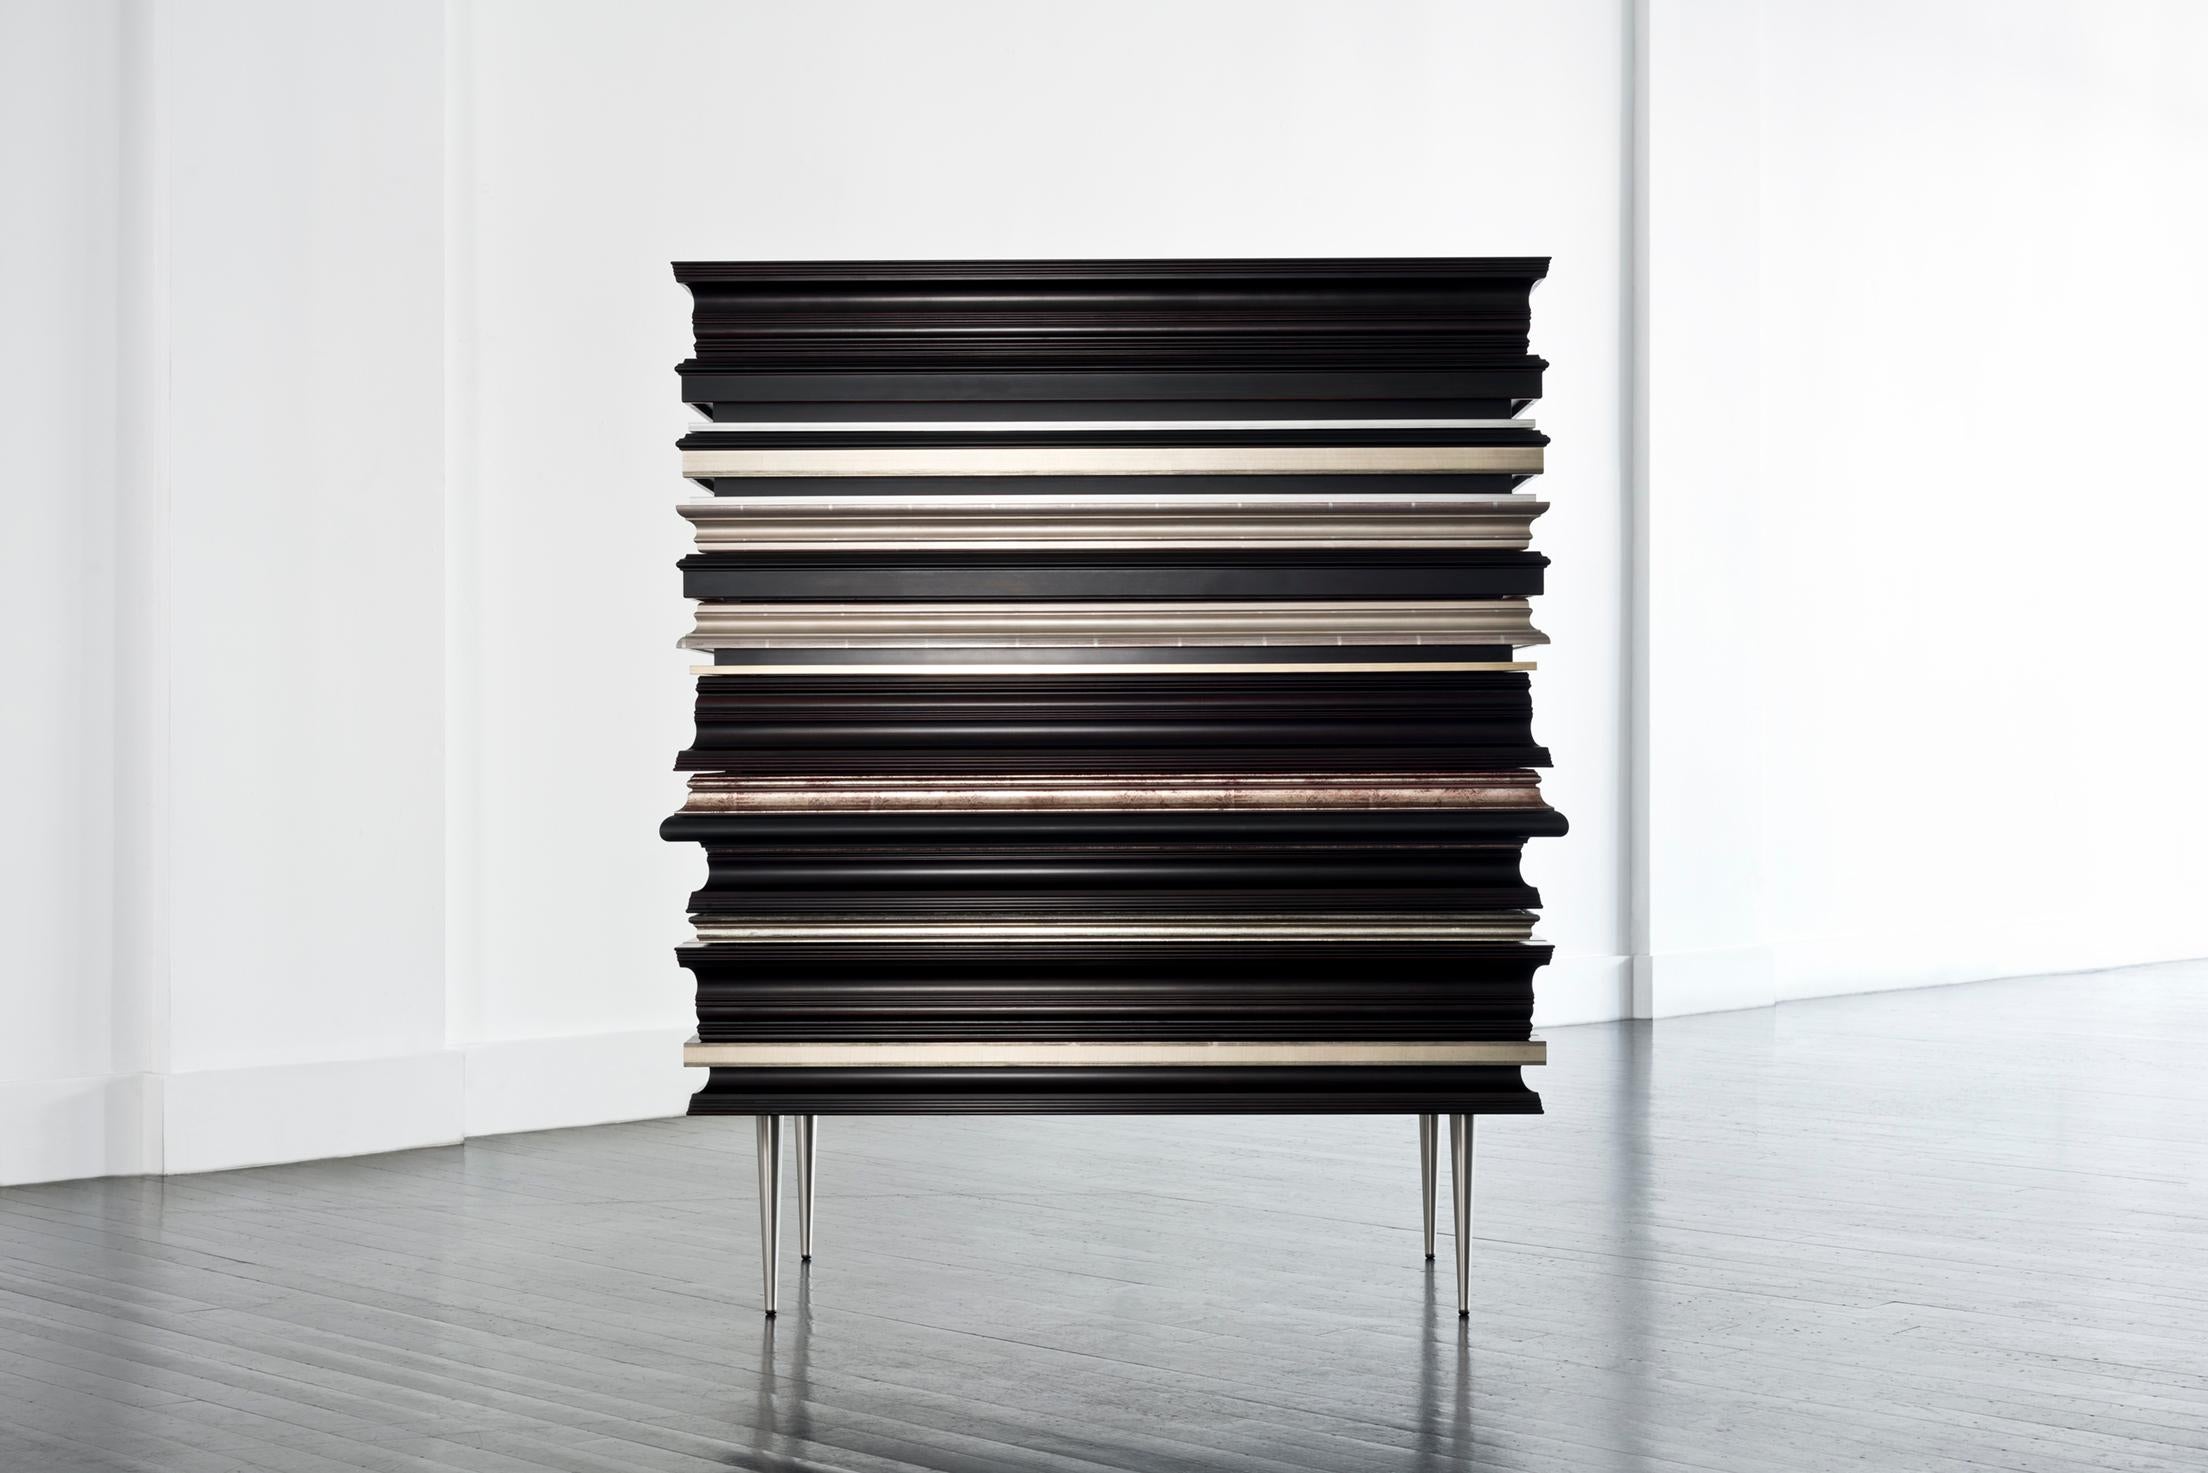 Frame dresser silver by Luis Pons.
Dimensions: W 91.5 x D 53.5 x H 112 cm.
Materials: Metal, wood, bronzed, hand-crafted.

Also available in different colors.

Fine crafted wood moldings are applied to the whole piece, concealing drawers and